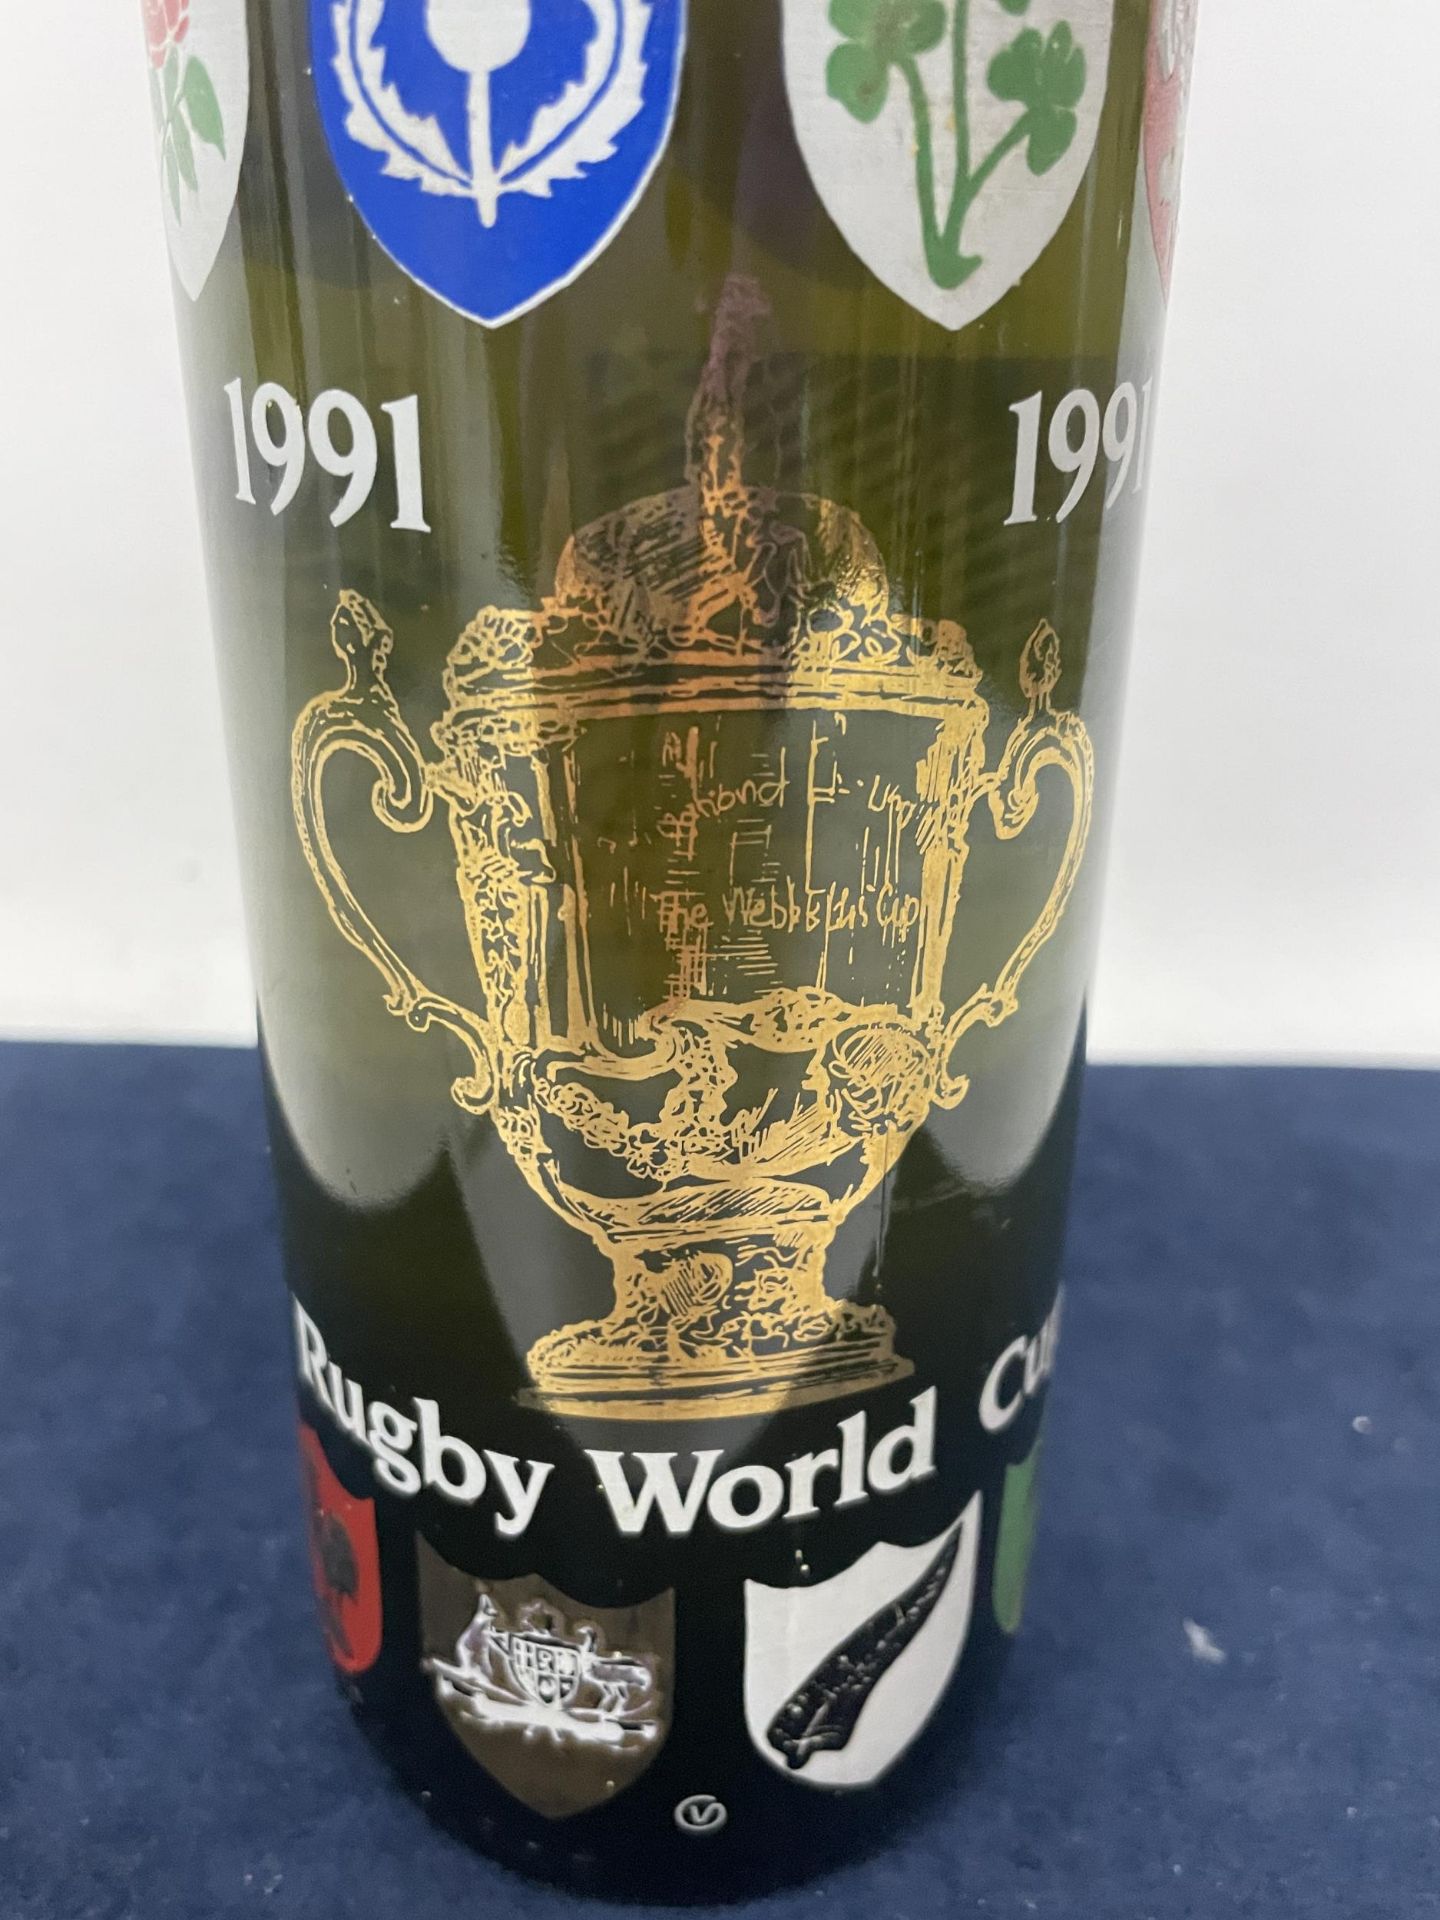 1 X 75CL BOTTLE - 1991 RUGBY WORLD CUP BOREDAUX WINE - Image 4 of 4